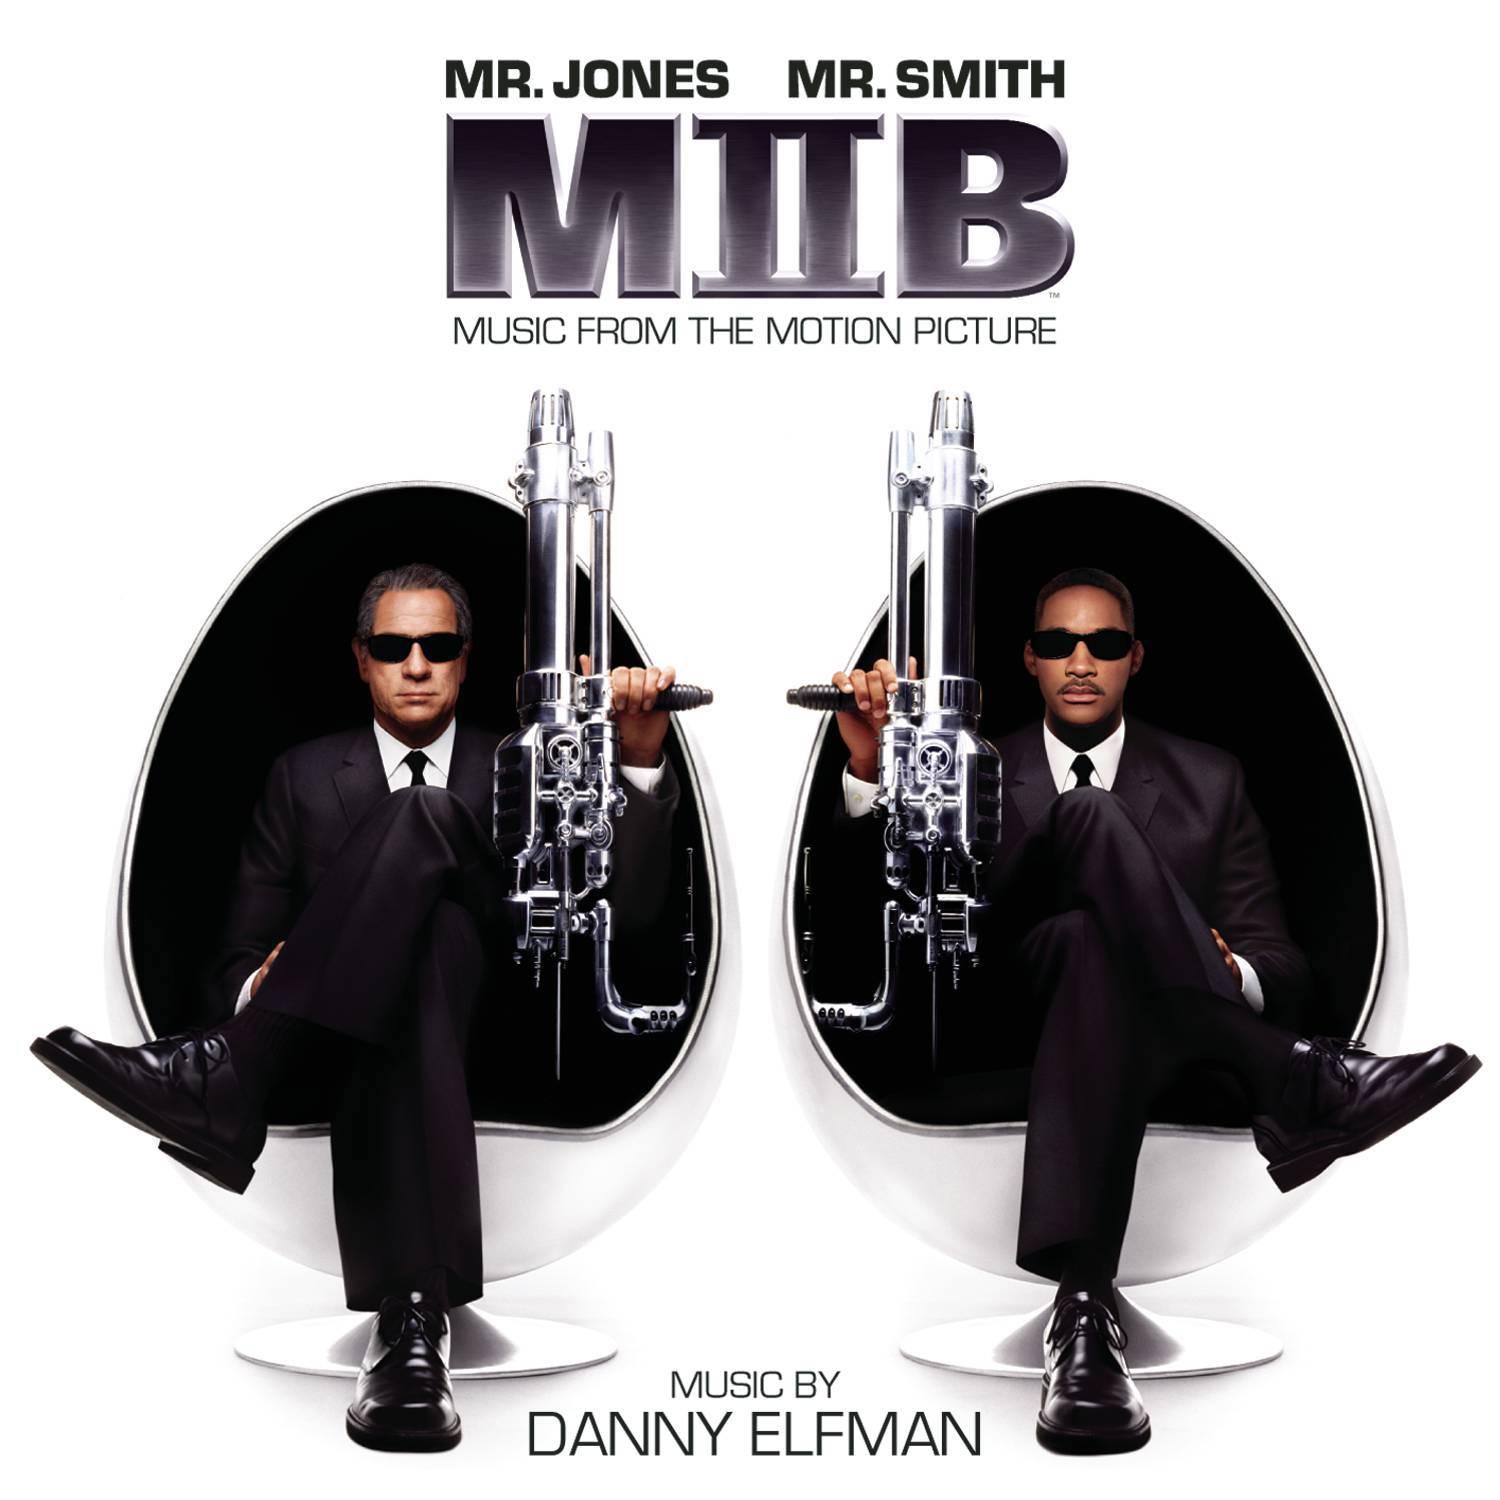 Men In Black II - Music From The Motion Picture